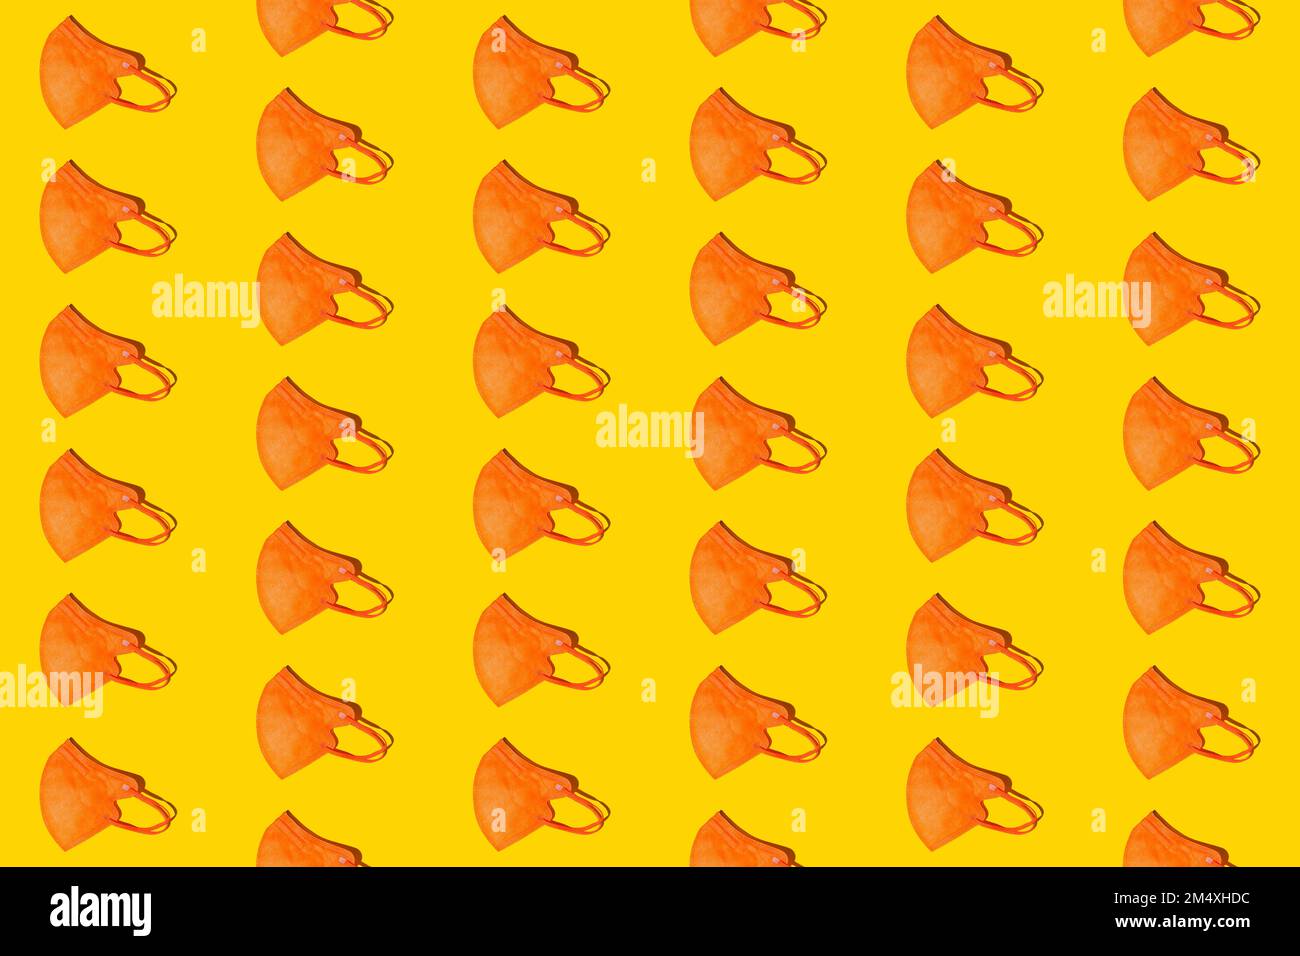 Pattern of rows of orange colored FFP2 masks flat laid against yellow background Stock Photo